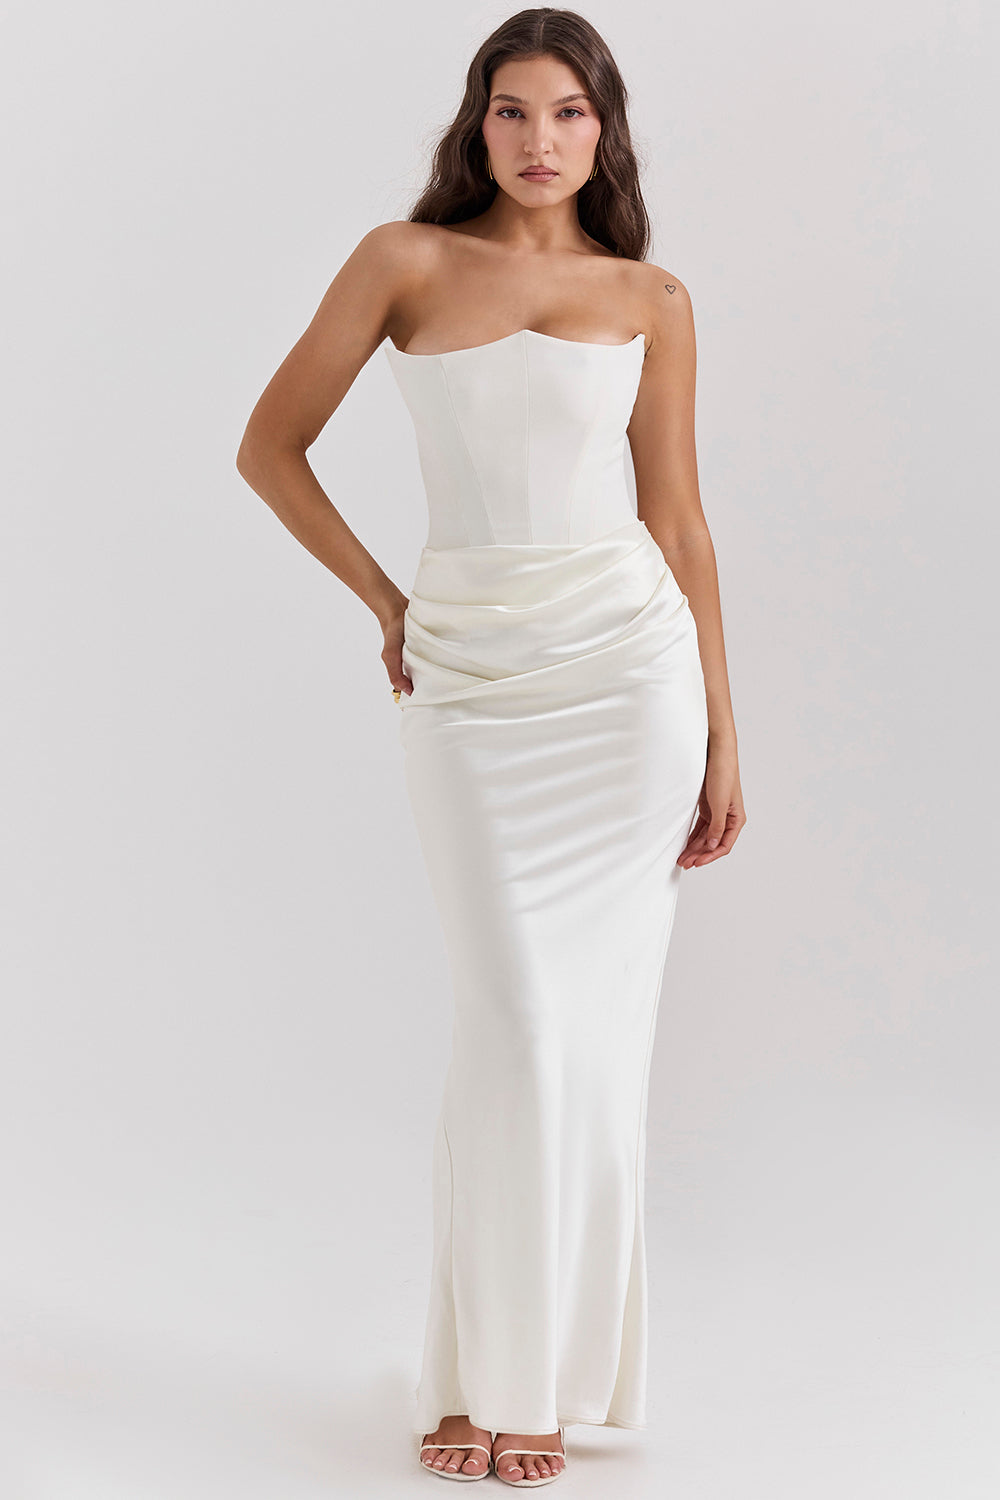 Hire HOUSE OF CB Persephone Strapless Corset Dress in Ivory